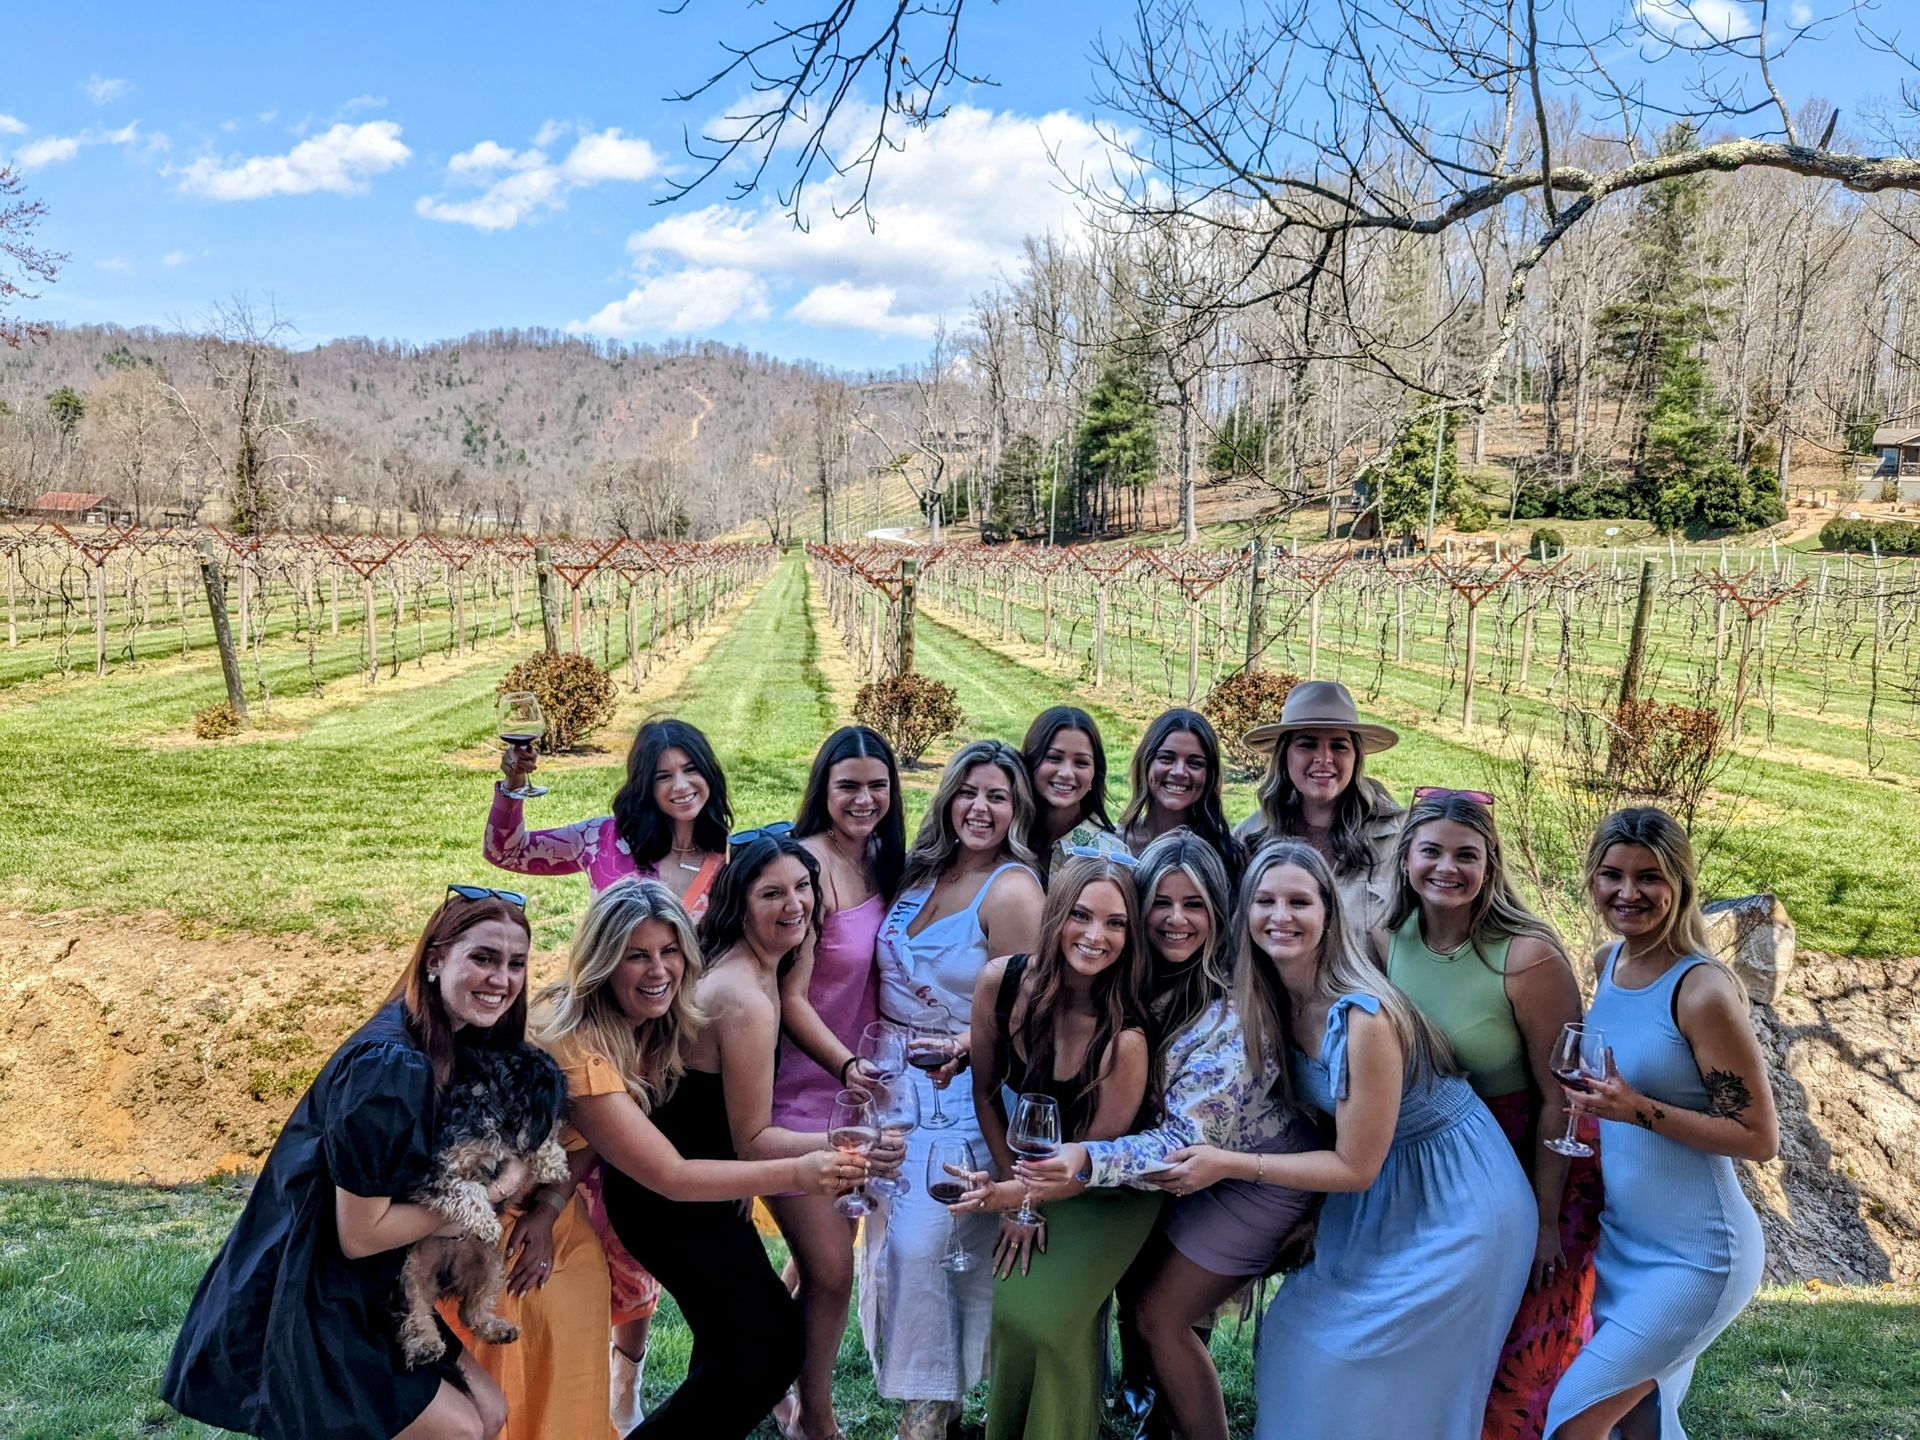 Boozy Wine Tour to 2 Blue Ridge Mountain Vineyards with Food & Wine Included image 1